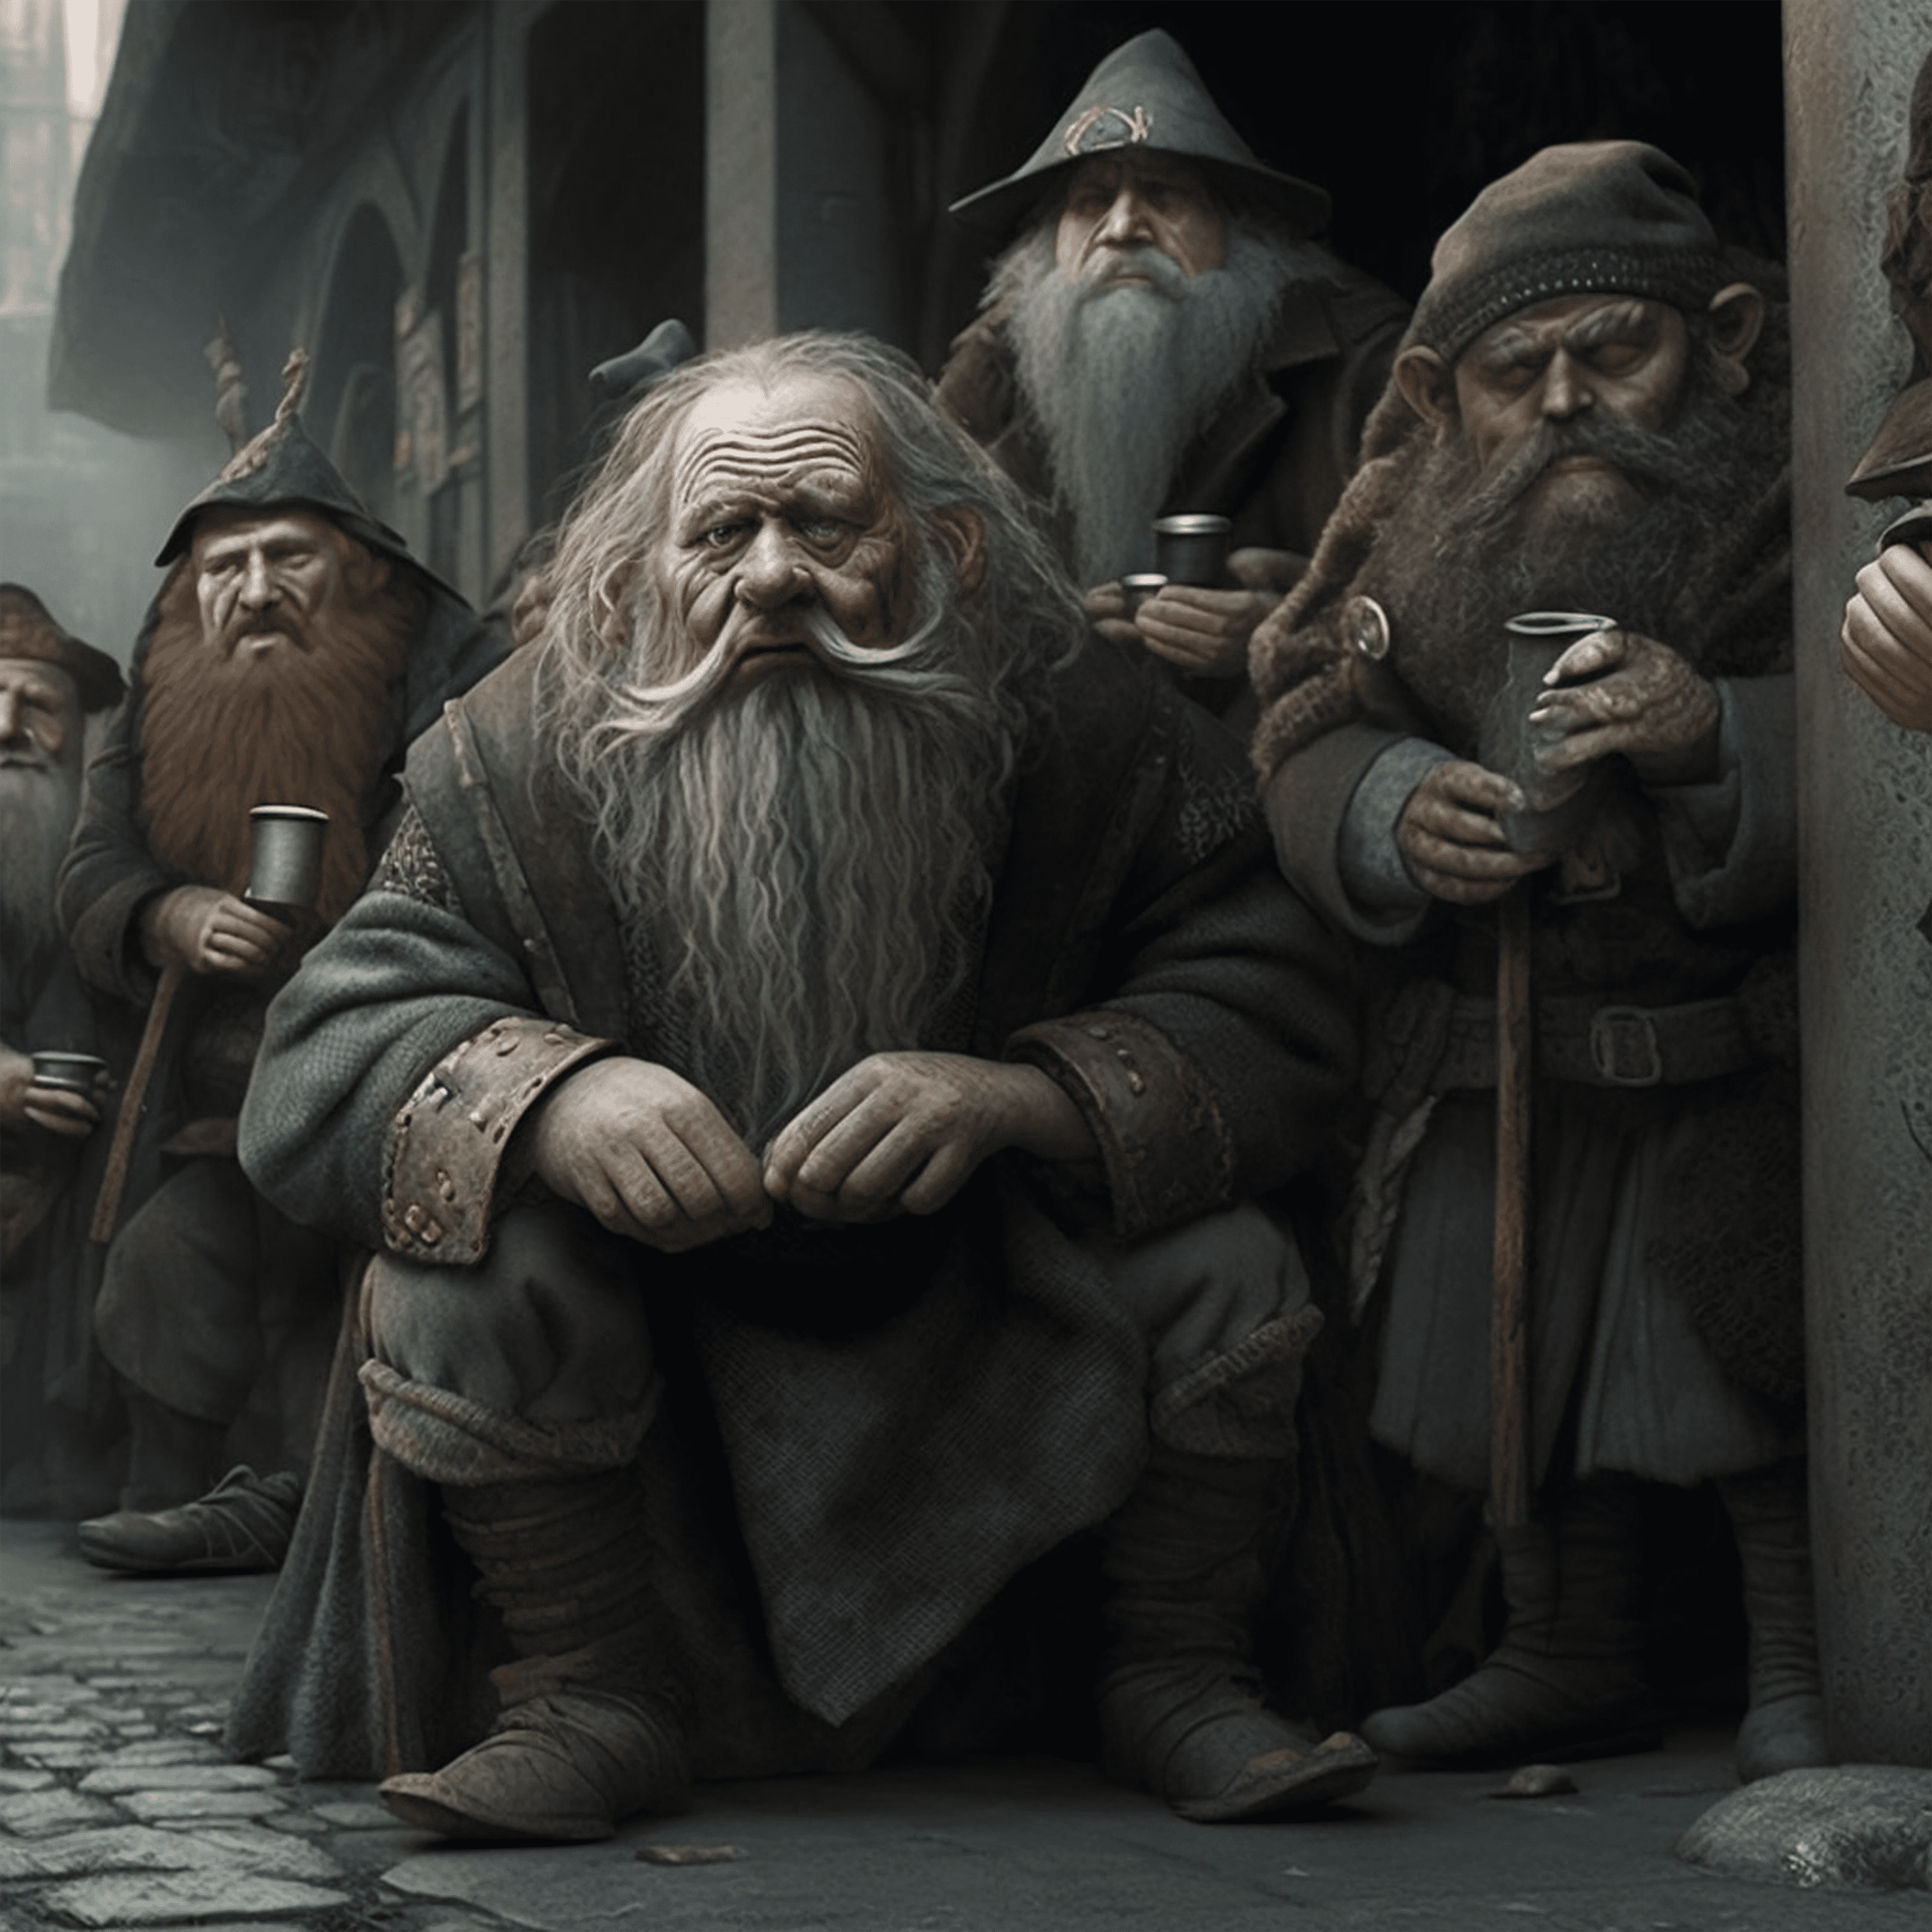 images/smmk_lord_of_rings_dwarves_begging_for_change_a0dc9cc9-07e9-467a-85bc-0f1da7697e25-0000.png